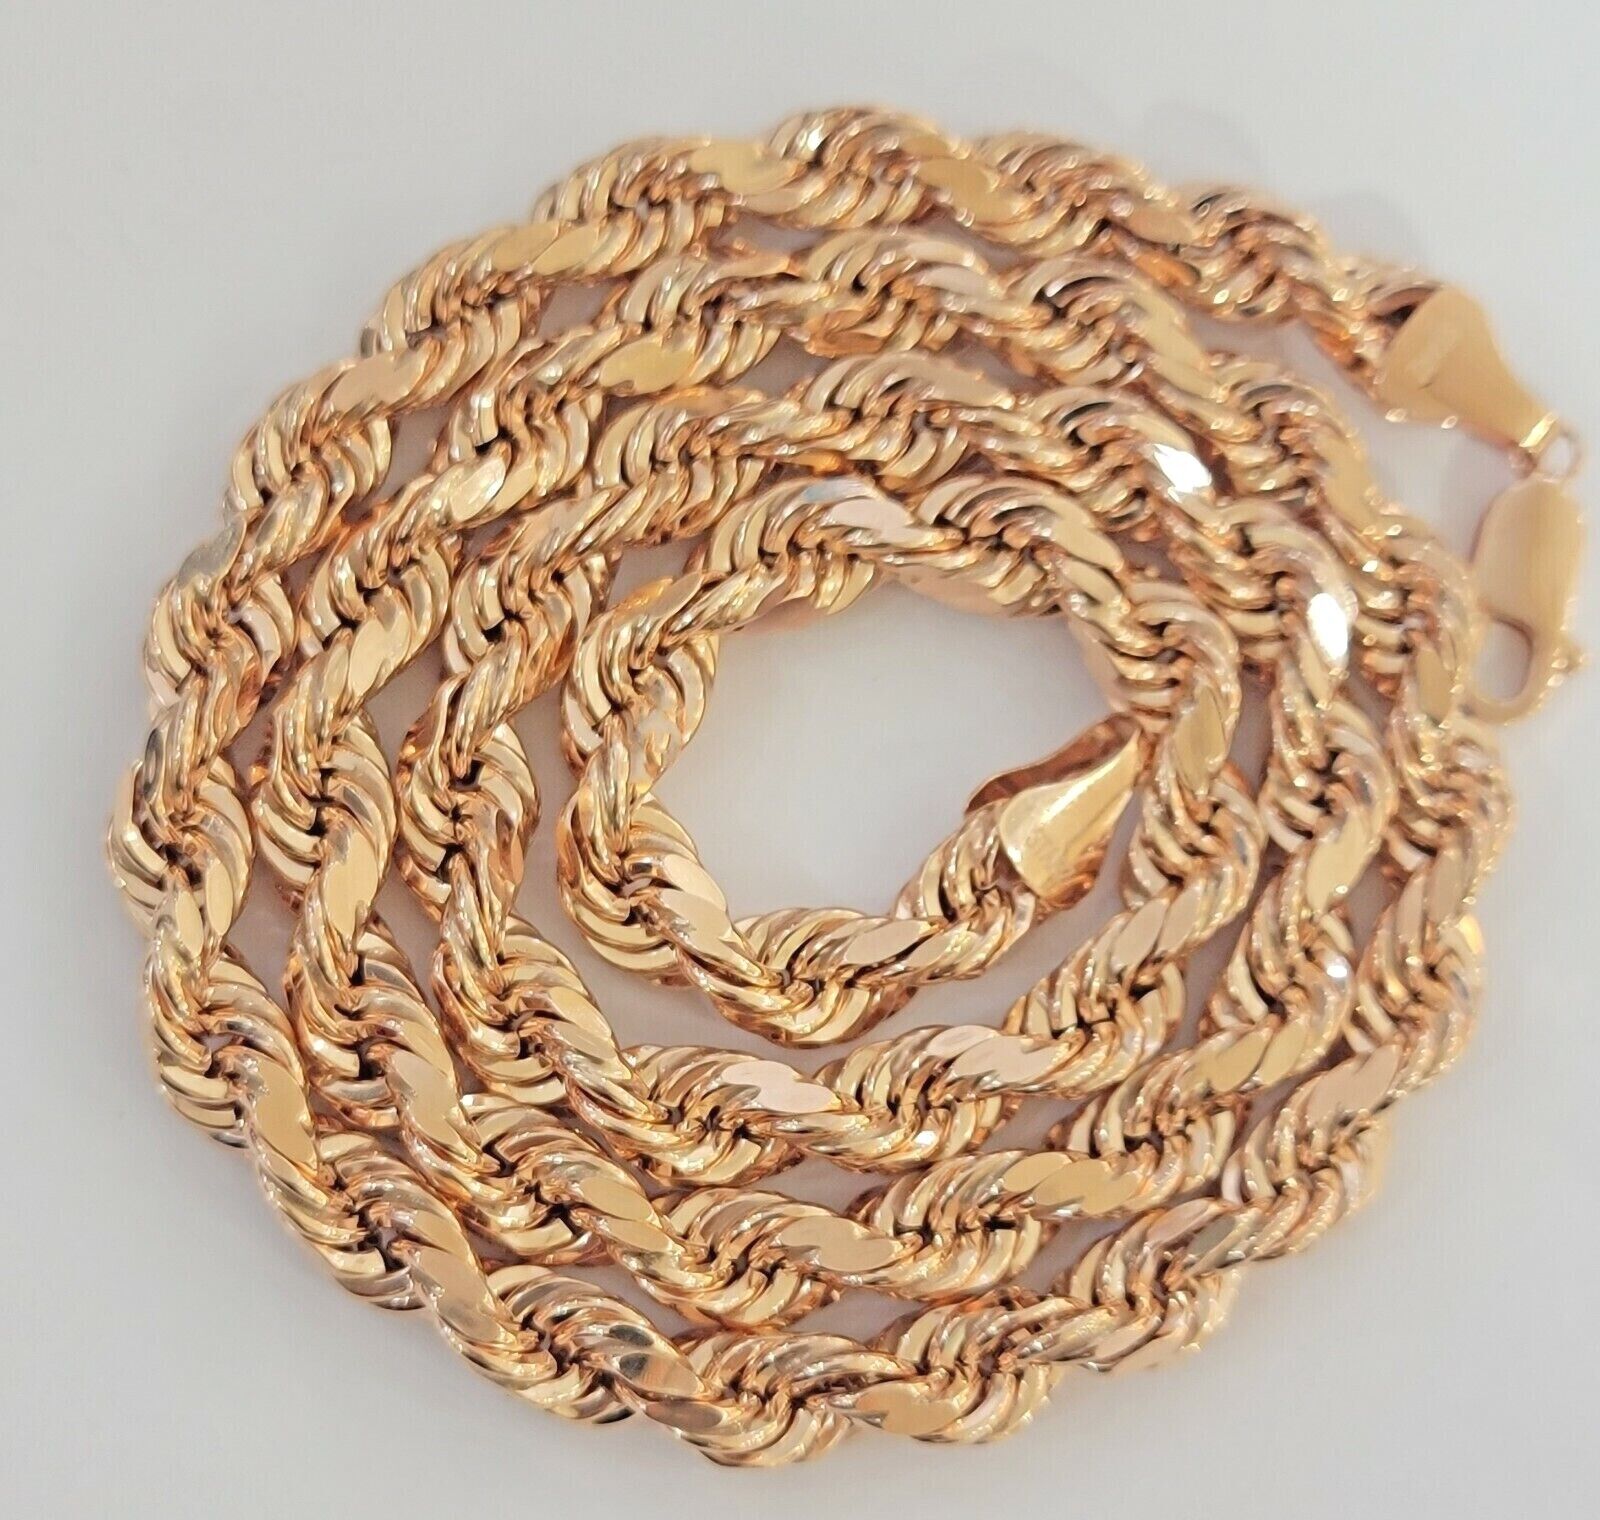 10k Rope Chain Solid Rose Gold Necklace 22 inch 7mm Diamond Cut Mens Heavy REAL